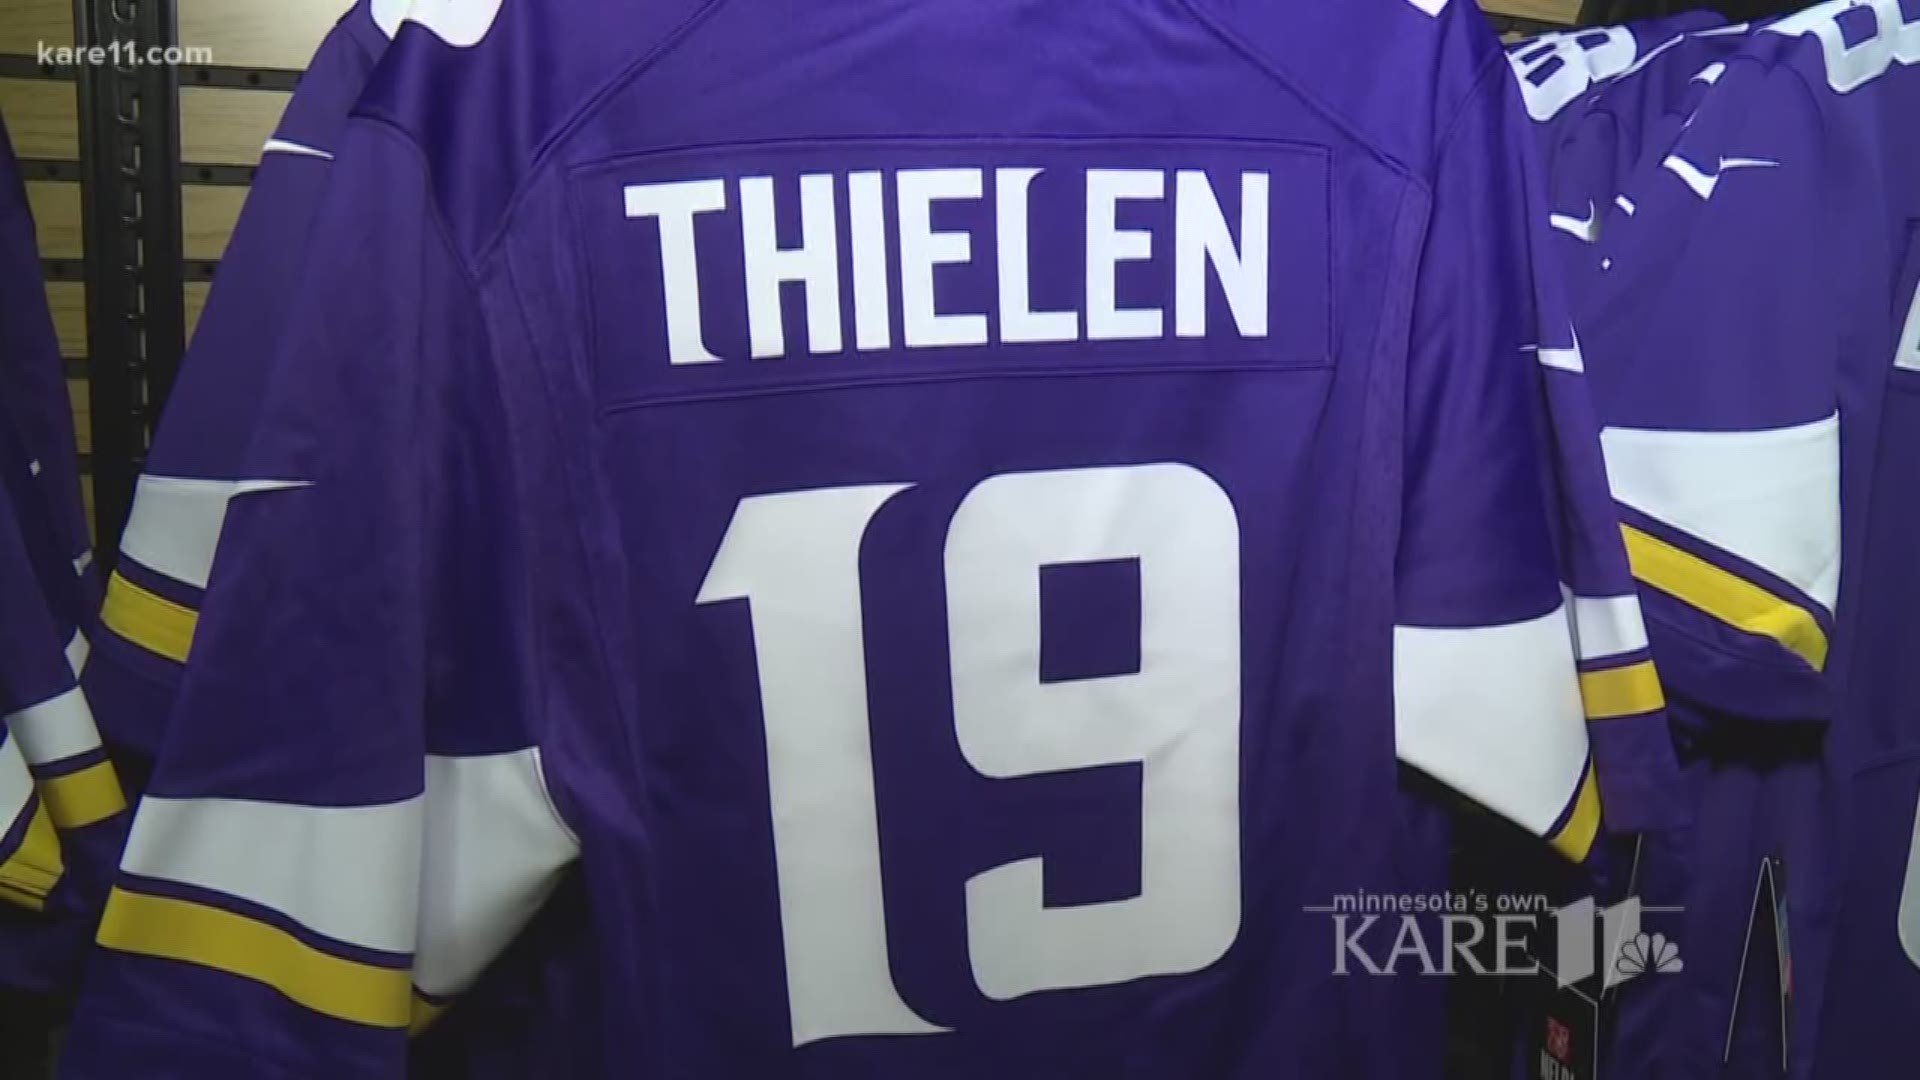 A trip to Mankato where Adam Thielen played in college to see how jersey sales are doing.